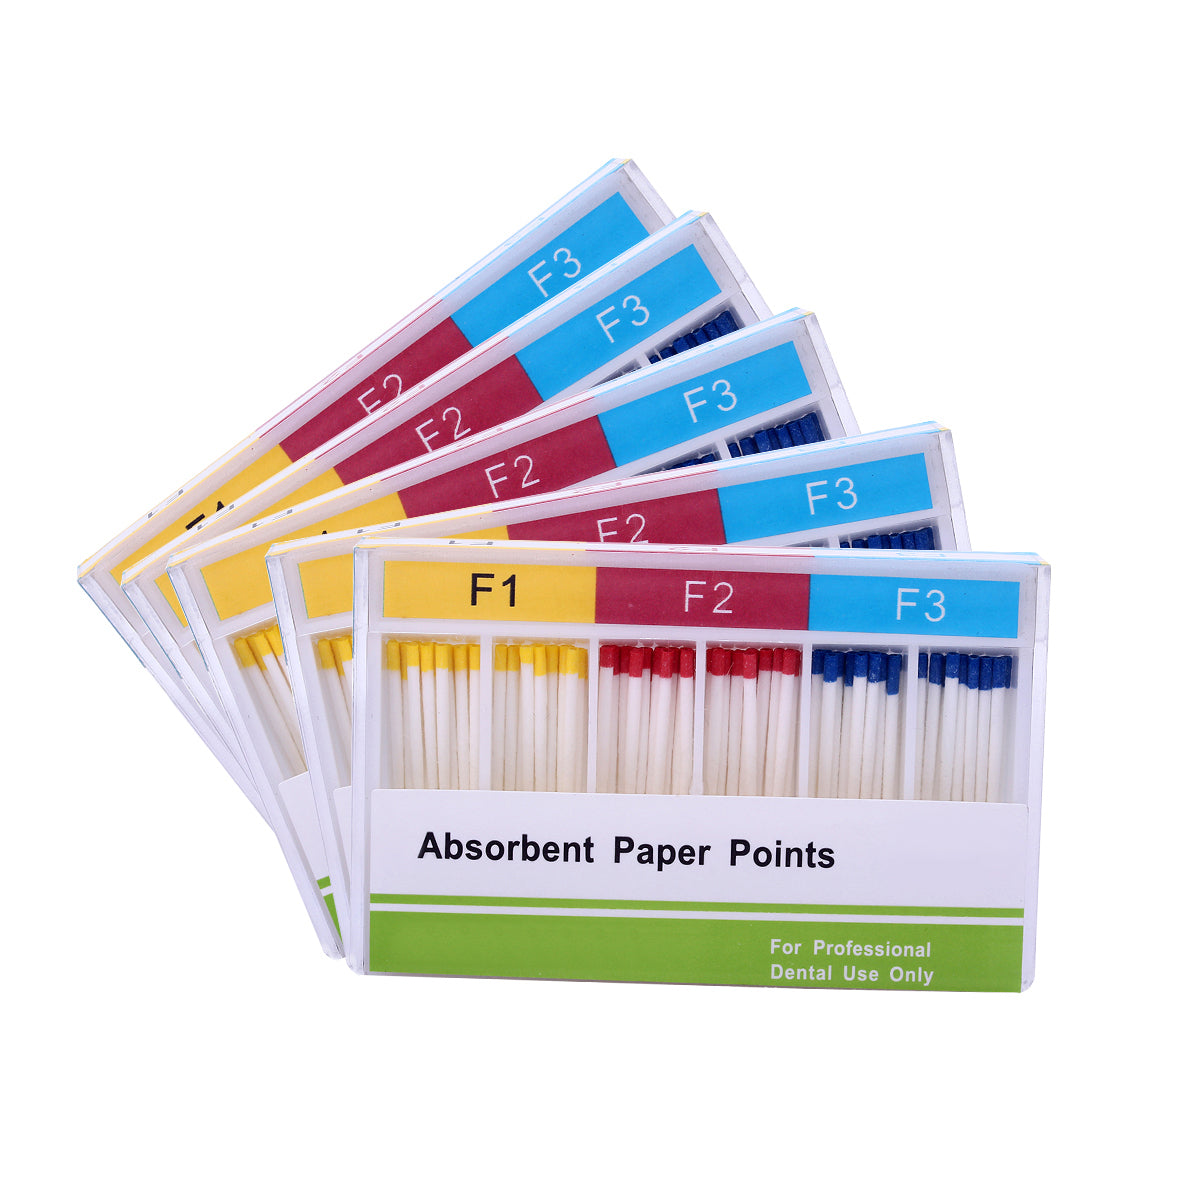 5 Boxes Absorbent Paper Points F Series Mixed F1 F2 F3 100/Box - azdentall.com